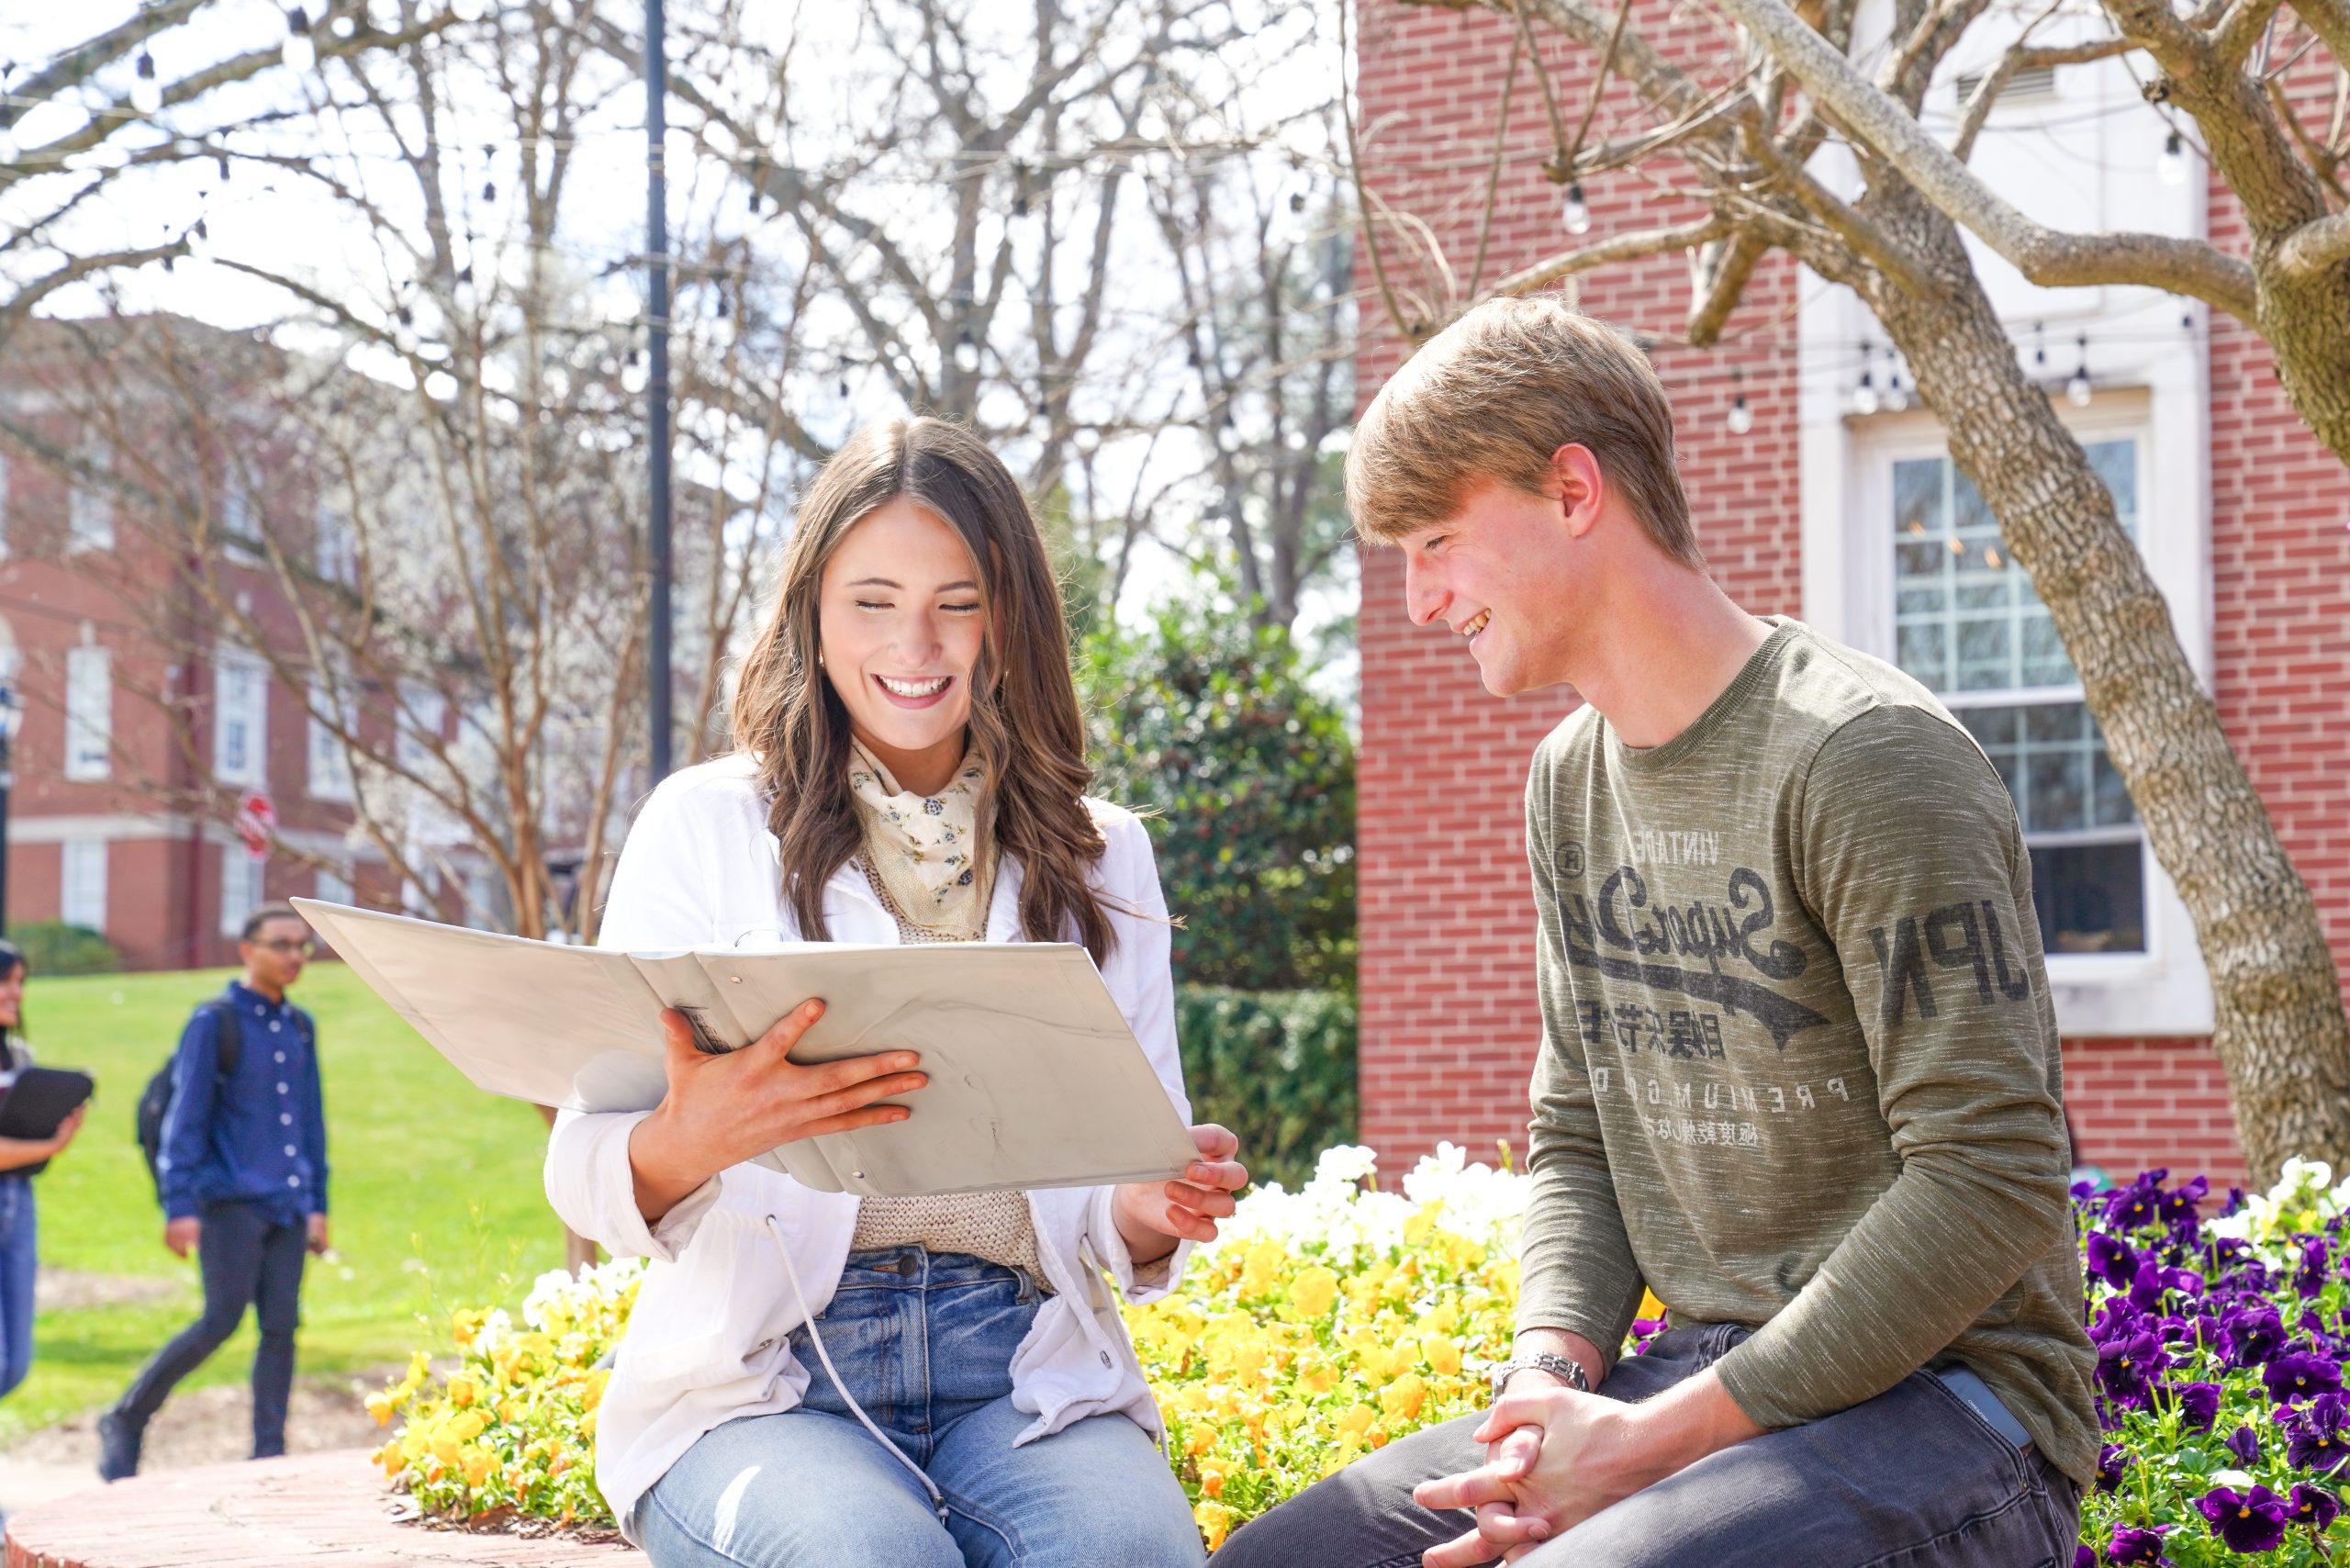 University of Montevallo students chat on the quad during a sunny day.